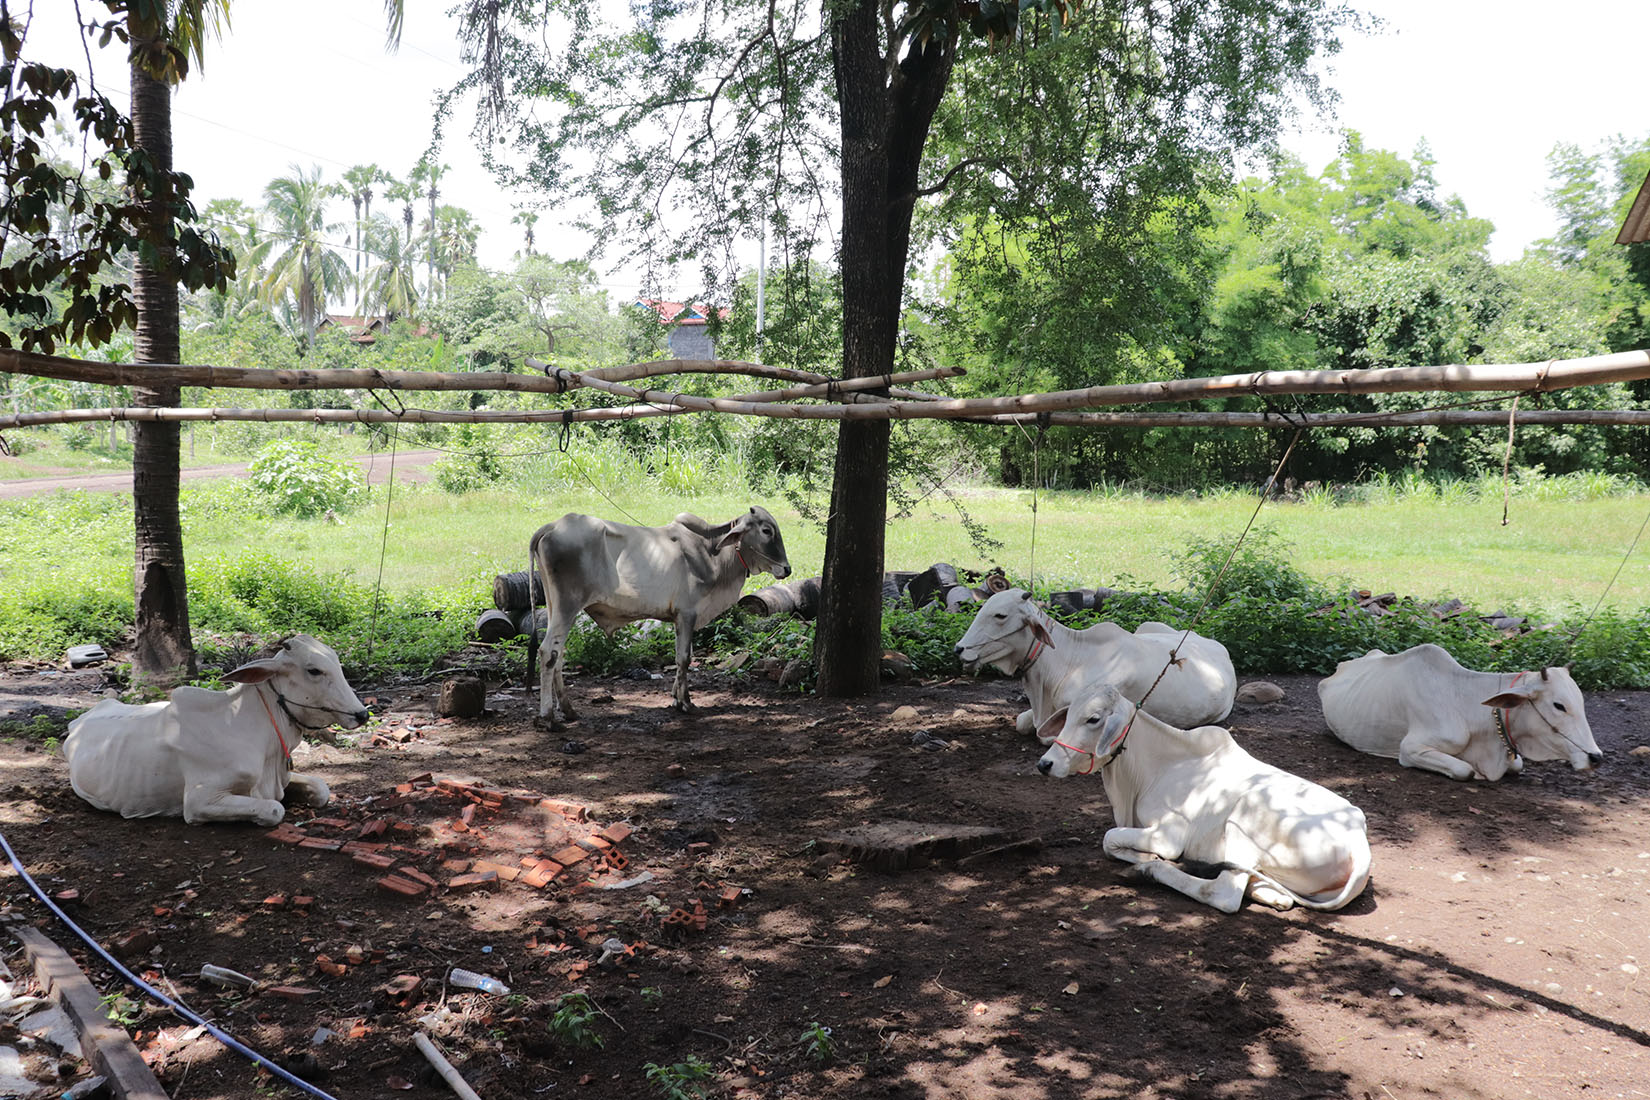 A group of white cows resting in the shade.